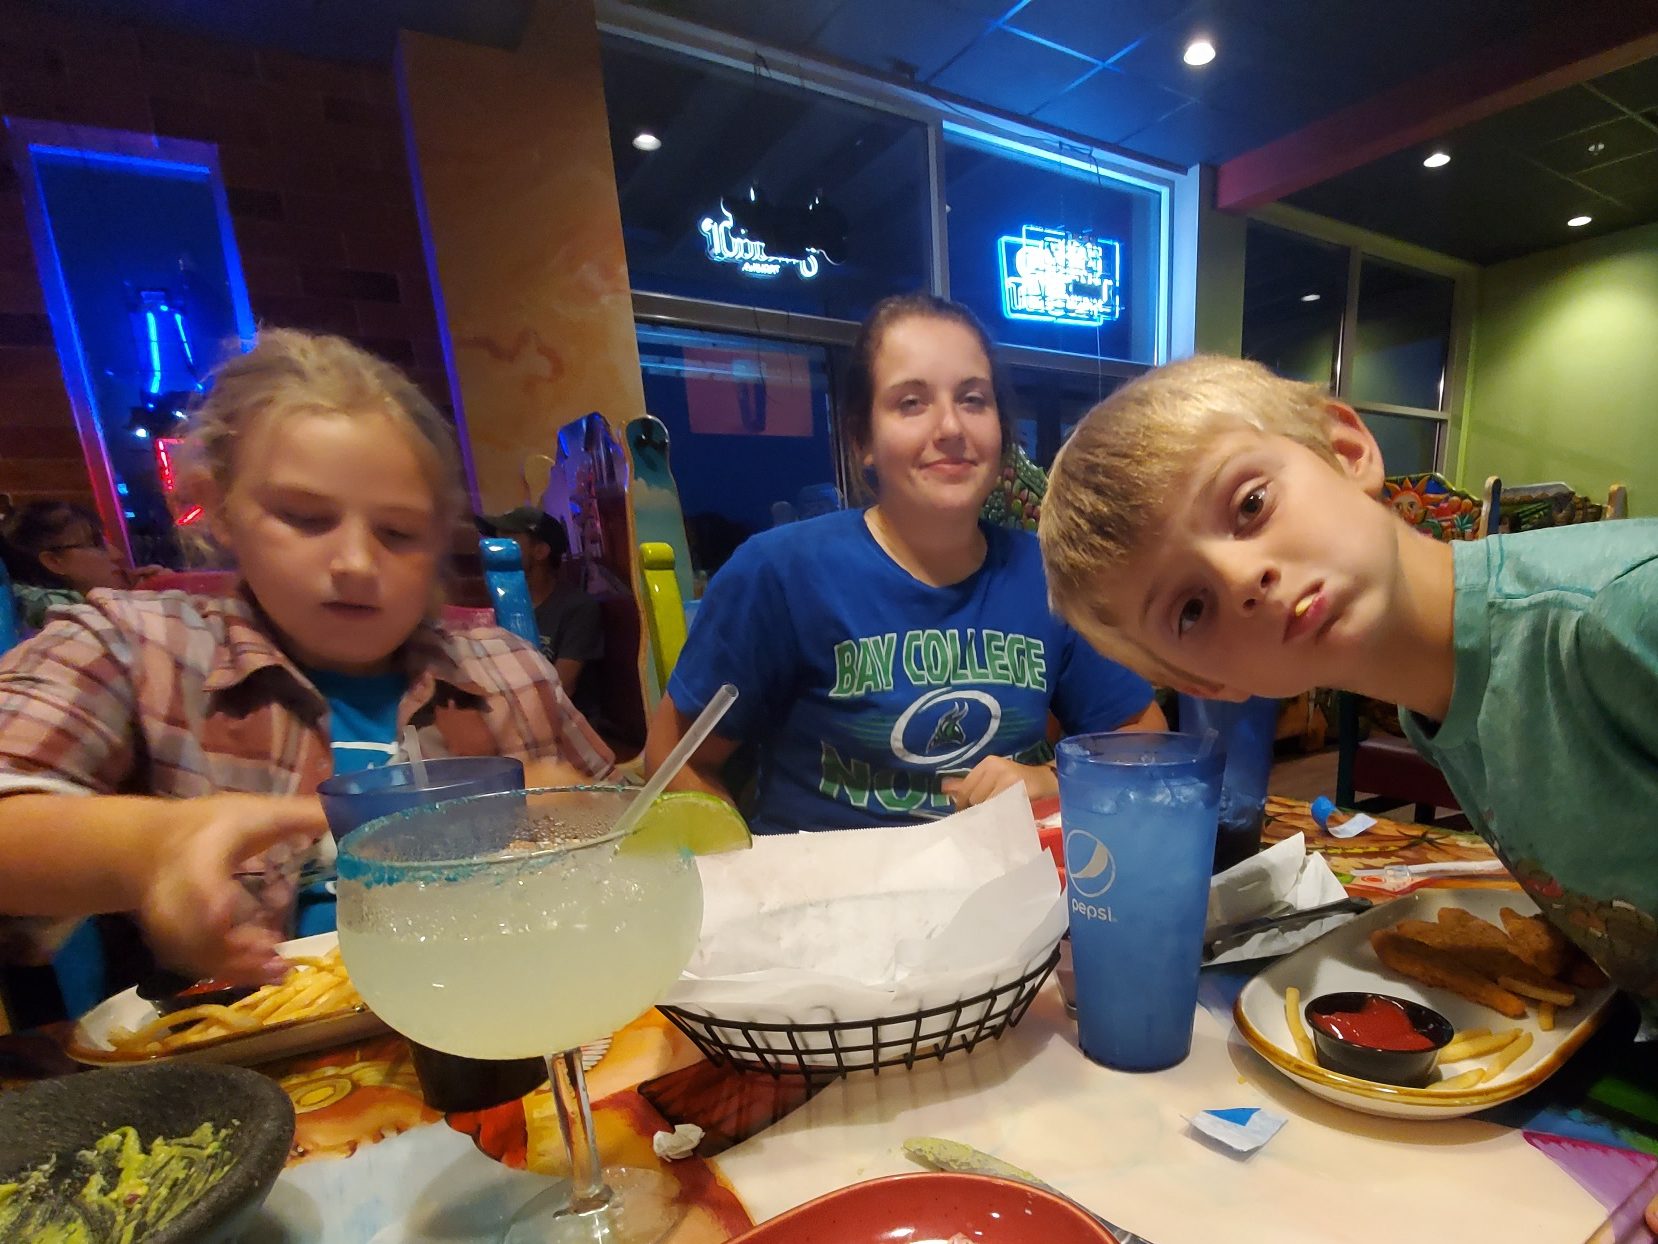 Our feast at a Mexican restaurant!